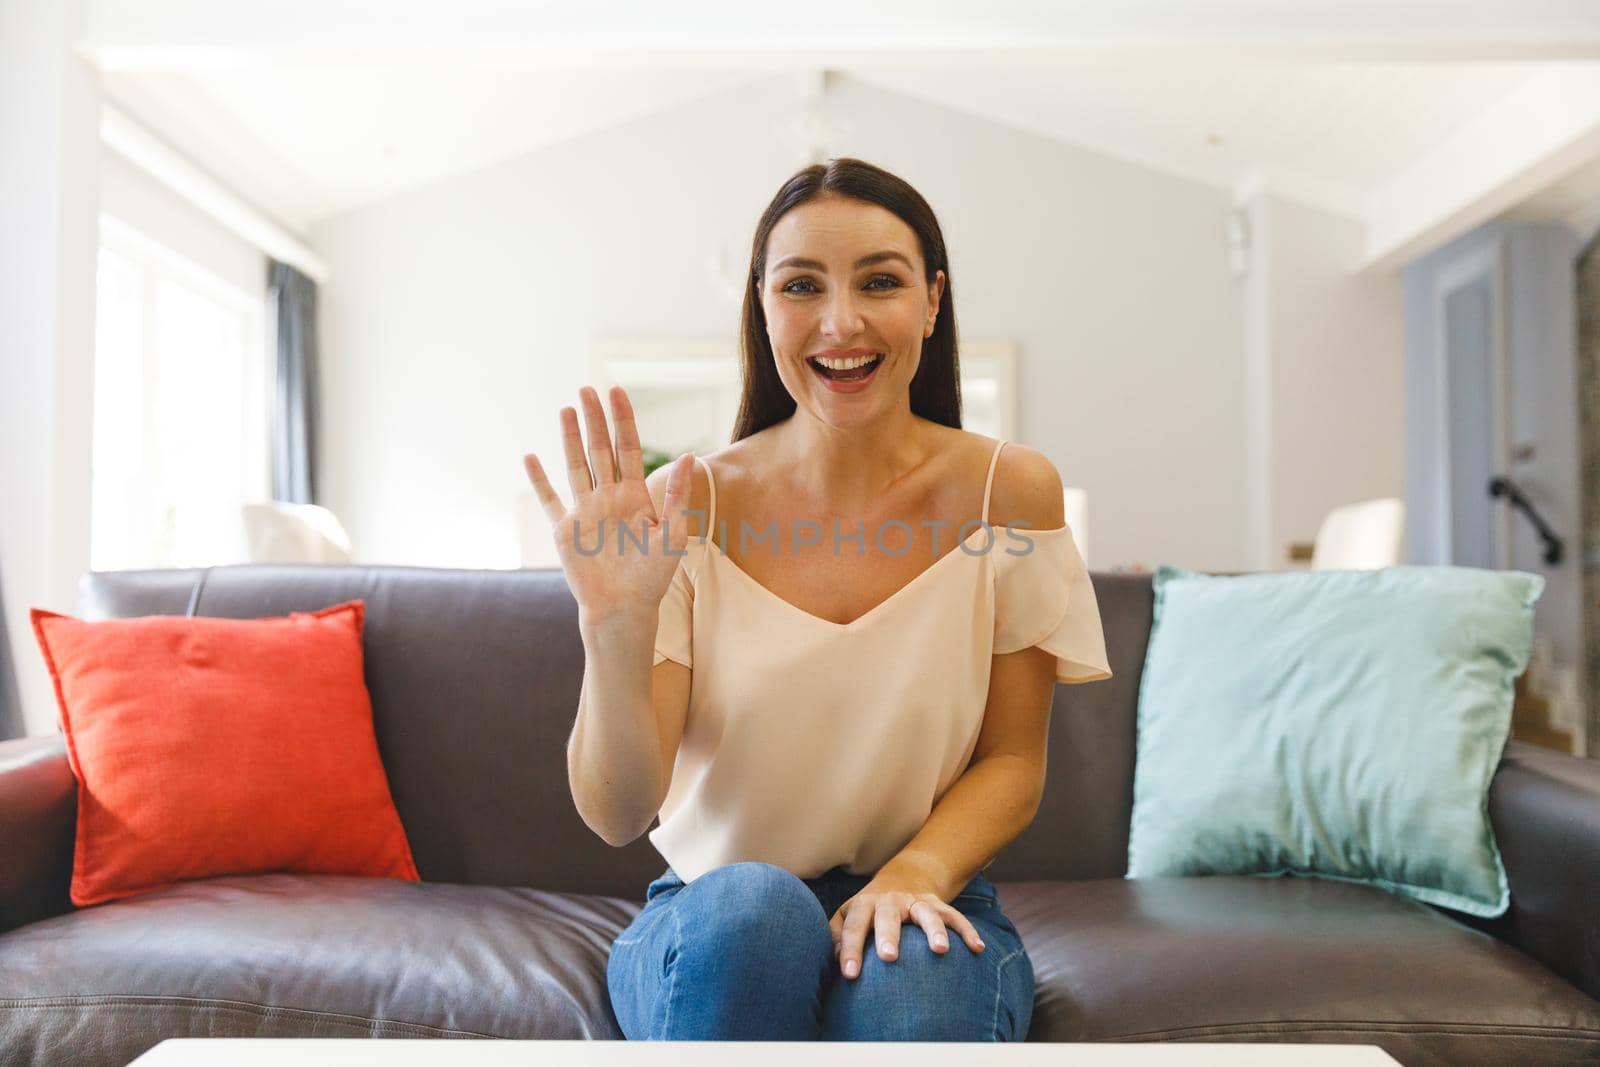 Caucasian woman sitting on couch having video call in living room, smiling and waving. keeping in touch, leisure time at home with communication technology.